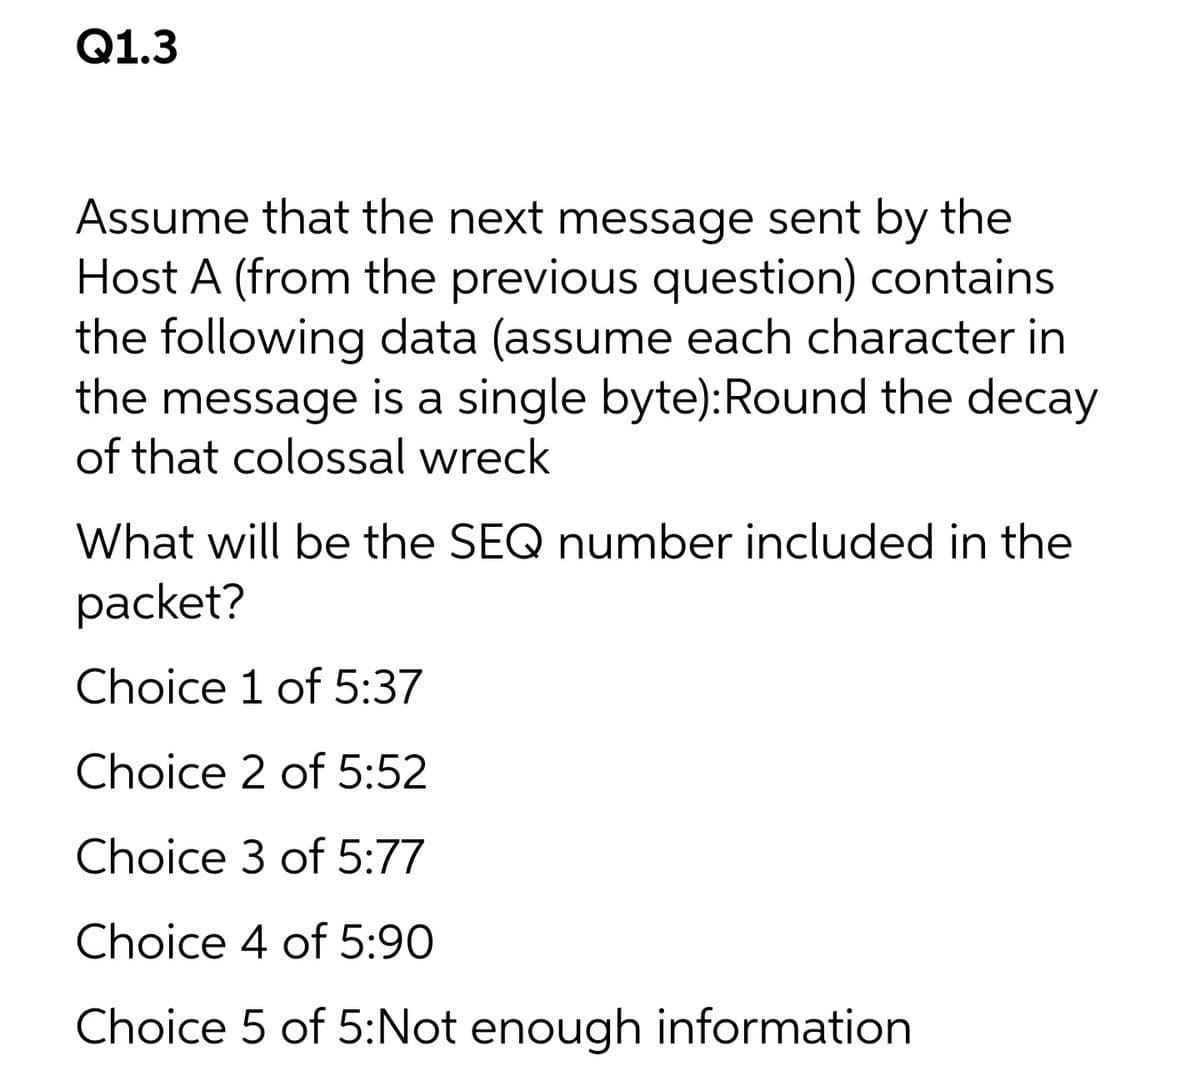 Q1.3
Assume that the next message sent by the
Host A (from the previous question) contains
the following data (assume each character in
the message is a single byte):Round the decay
of that colossal wreck
What will be the SEQ number included in the
packet?
Choice 1 of 5:37
Choice 2 of 5:52
Choice 3 of 5:77
Choice 4 of 5:90
Choice 5 of 5:Not enough information
